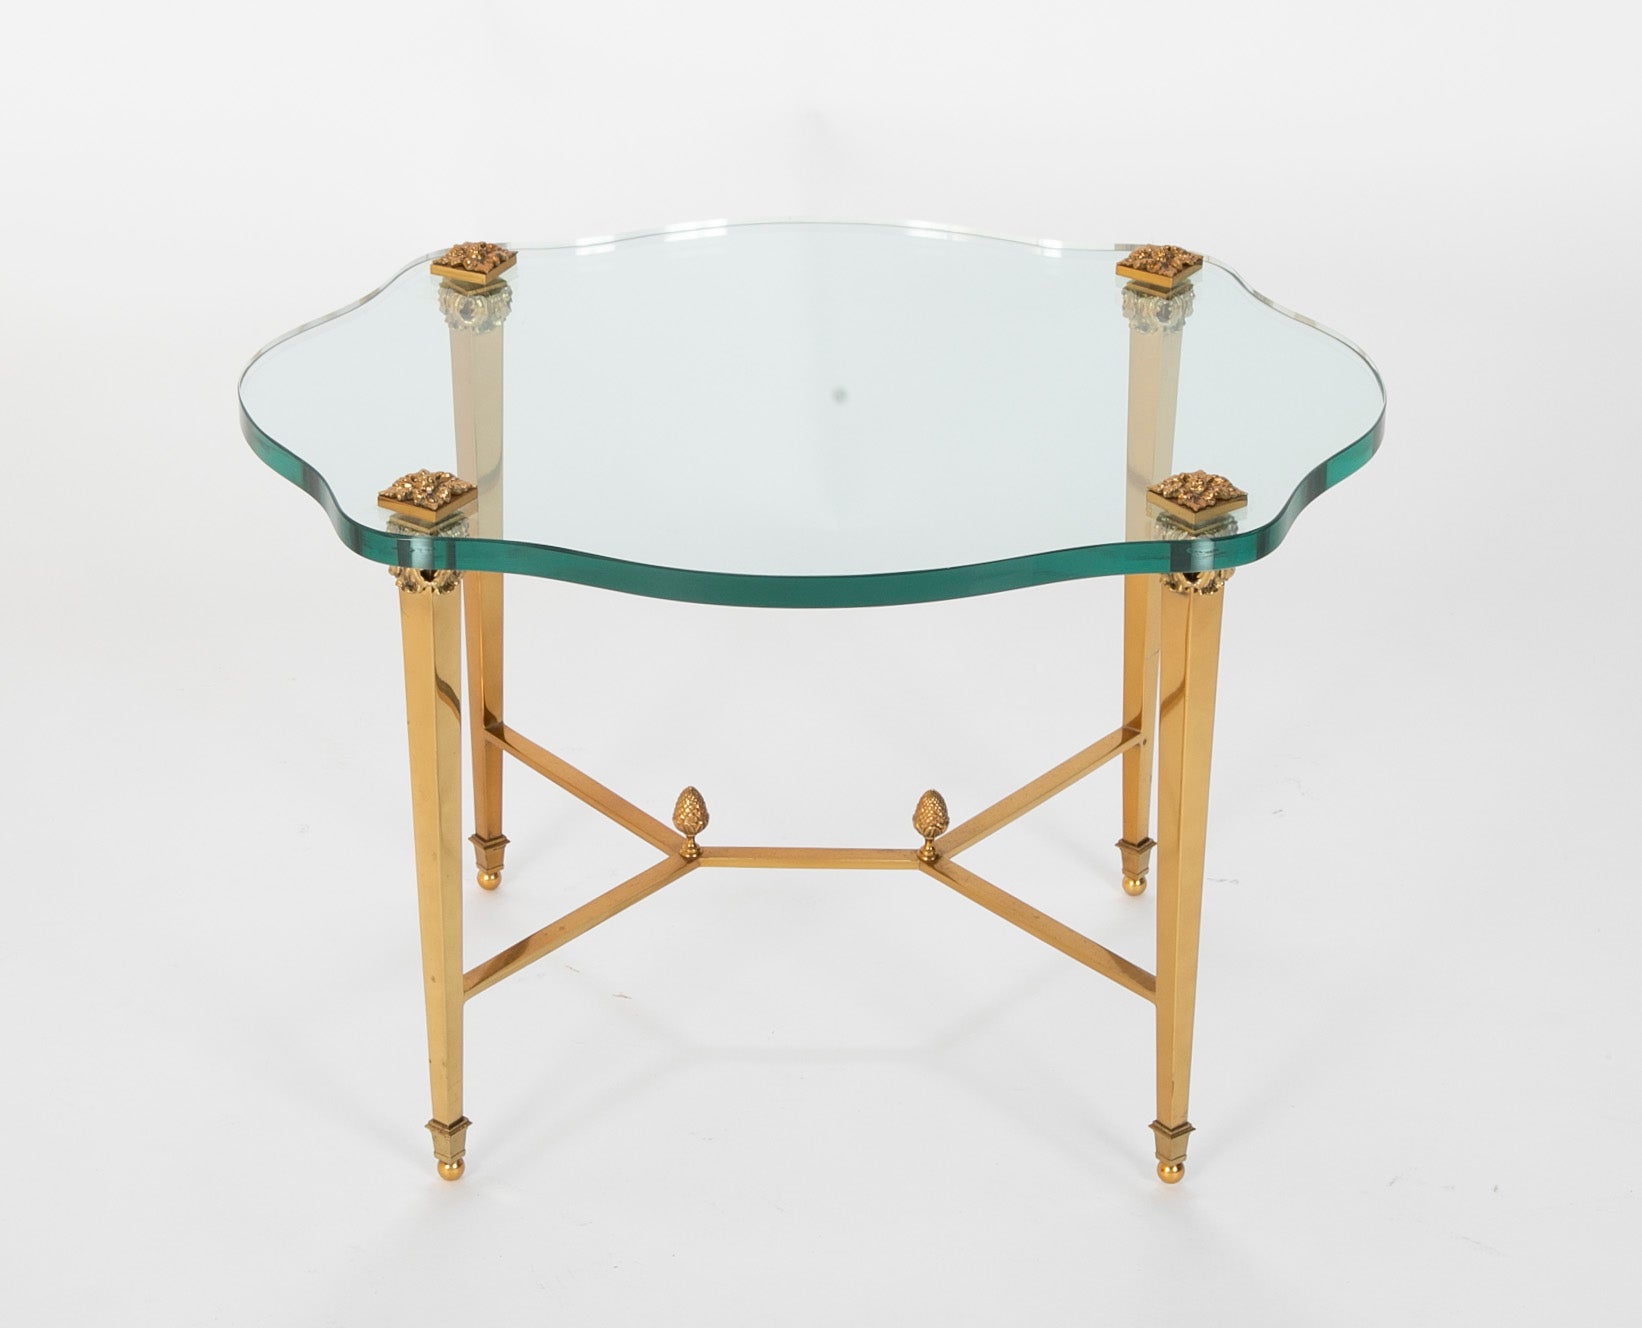 French Neo-Classical Style Gilt Bronze & Glass Table in the Manner of Guerin